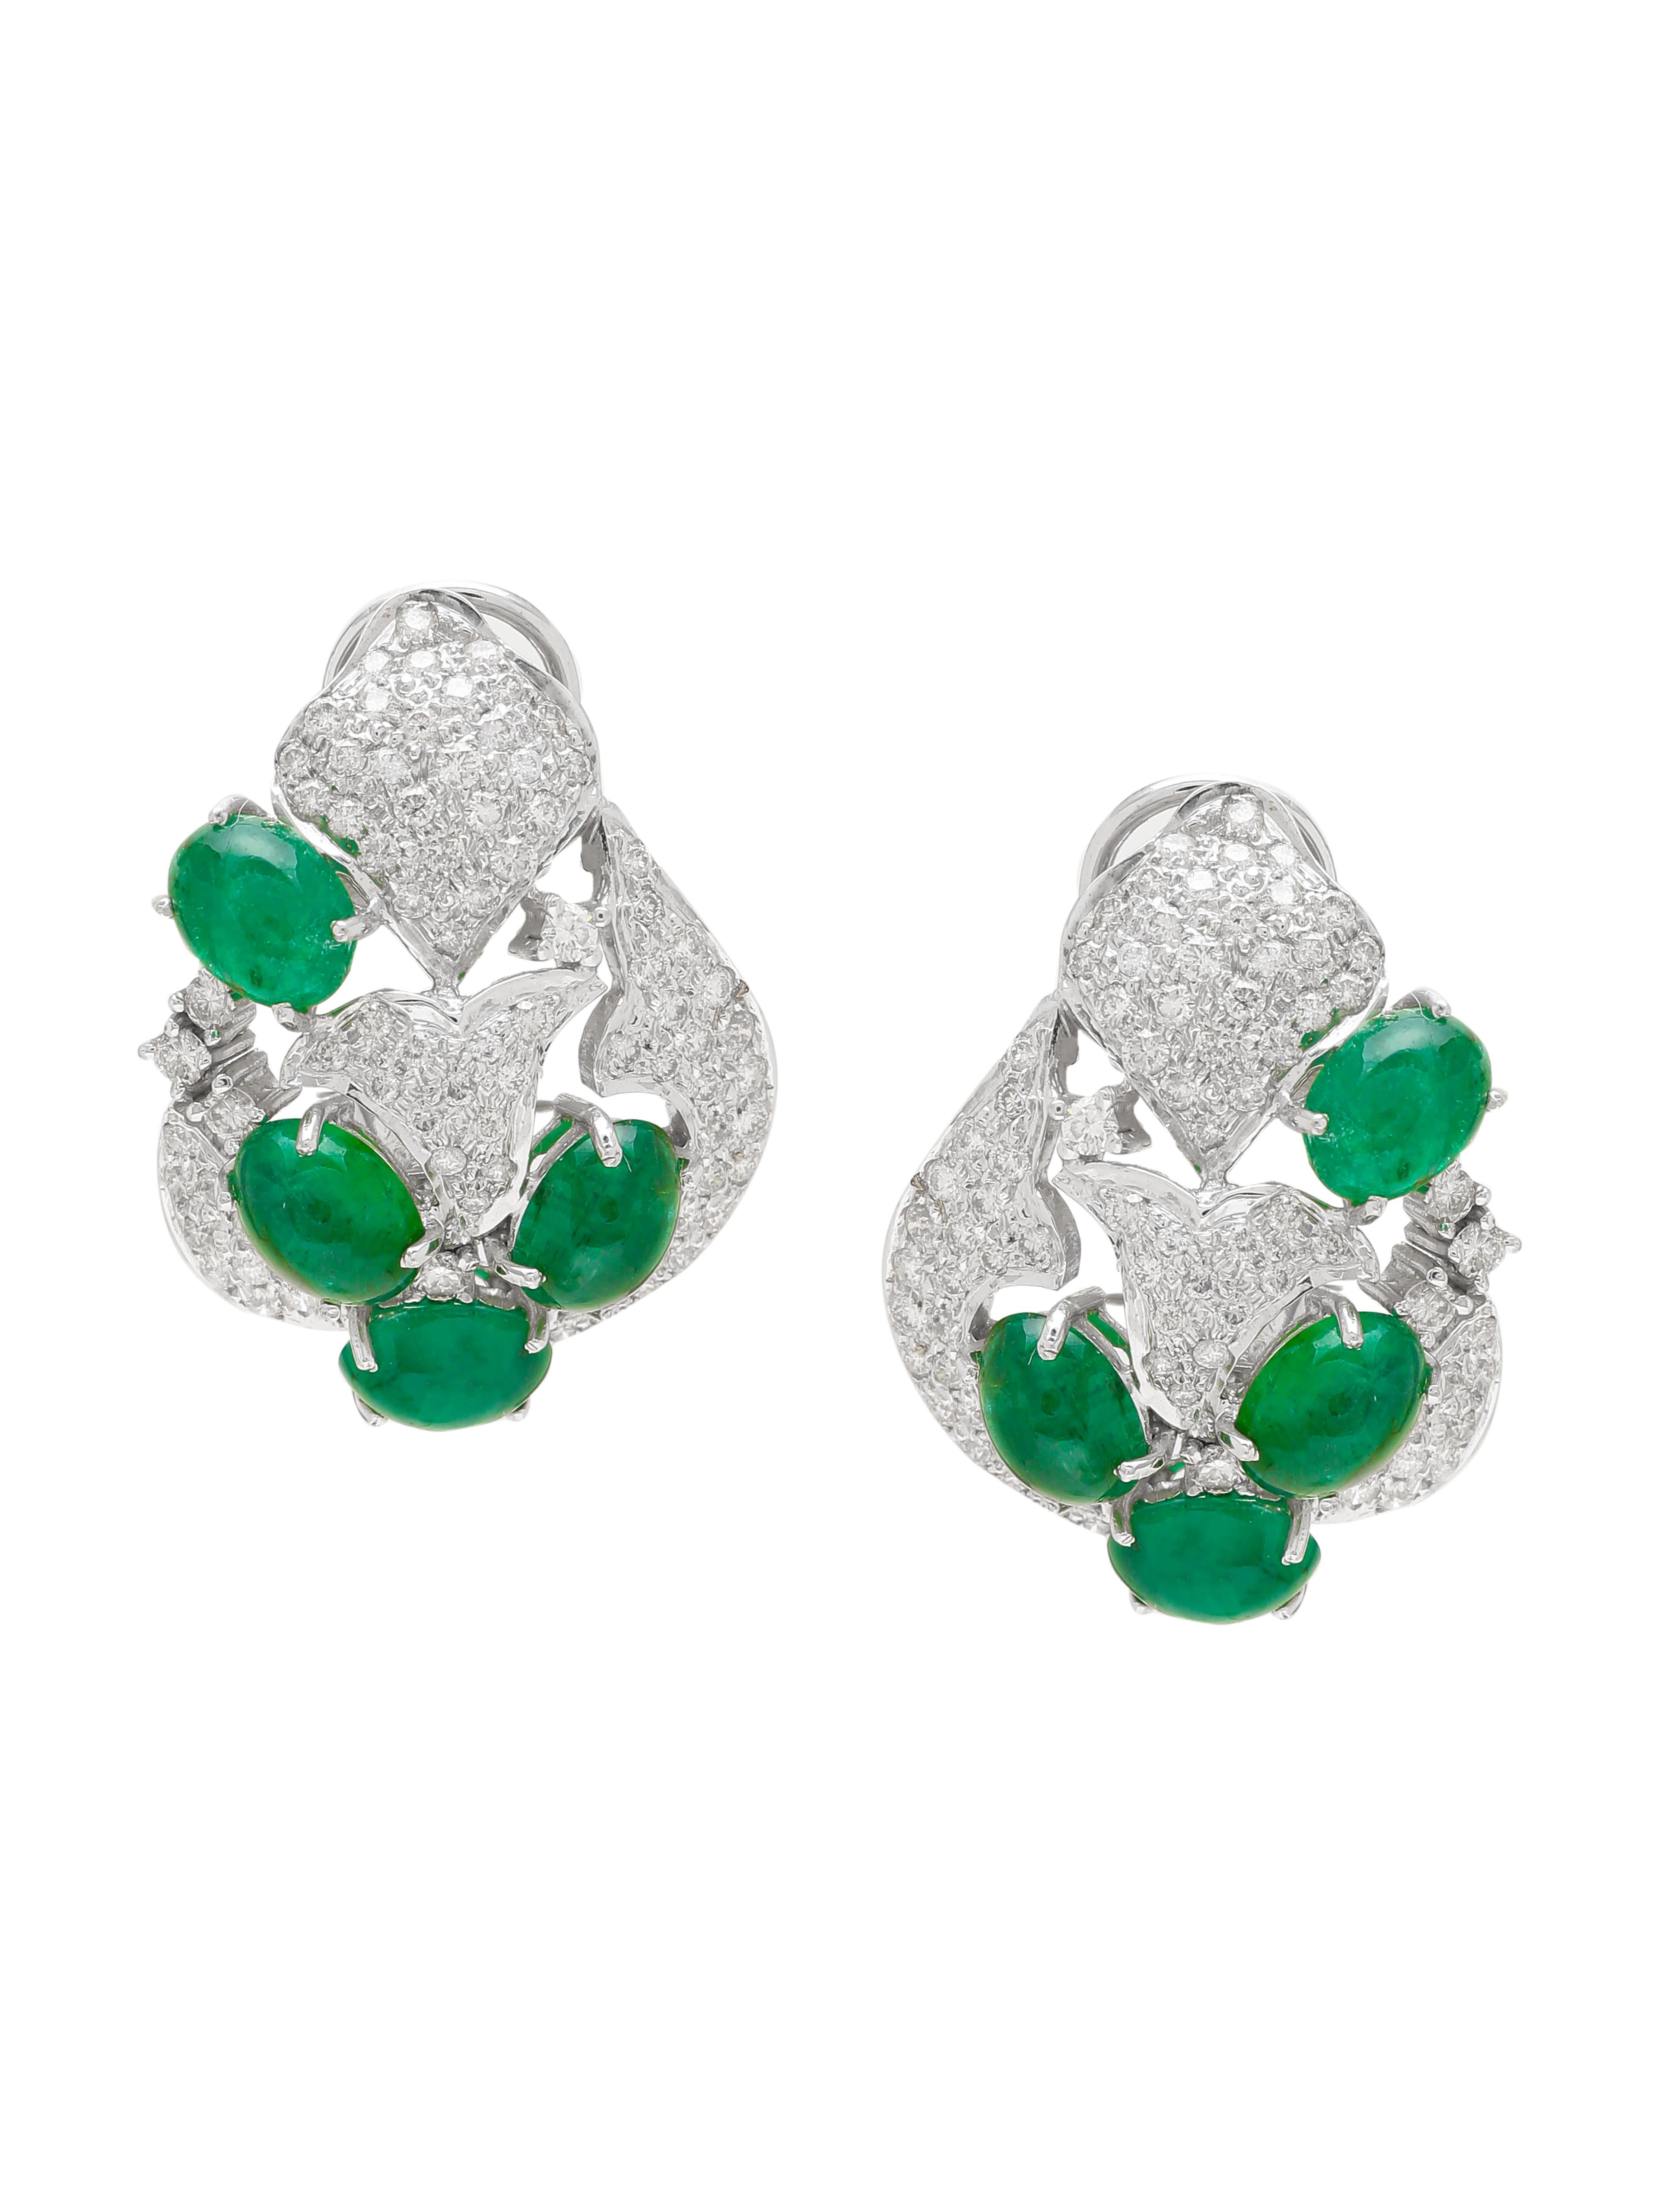 A pair of pretty Stud Earrings with Zambian Oval Emerald Cabochons and Small Round Diamonds set all around. The earrings are beautifully made in 18K White Gold. We have used really good quality Diamonds. With the Emeralds and Shiney Diamonds the